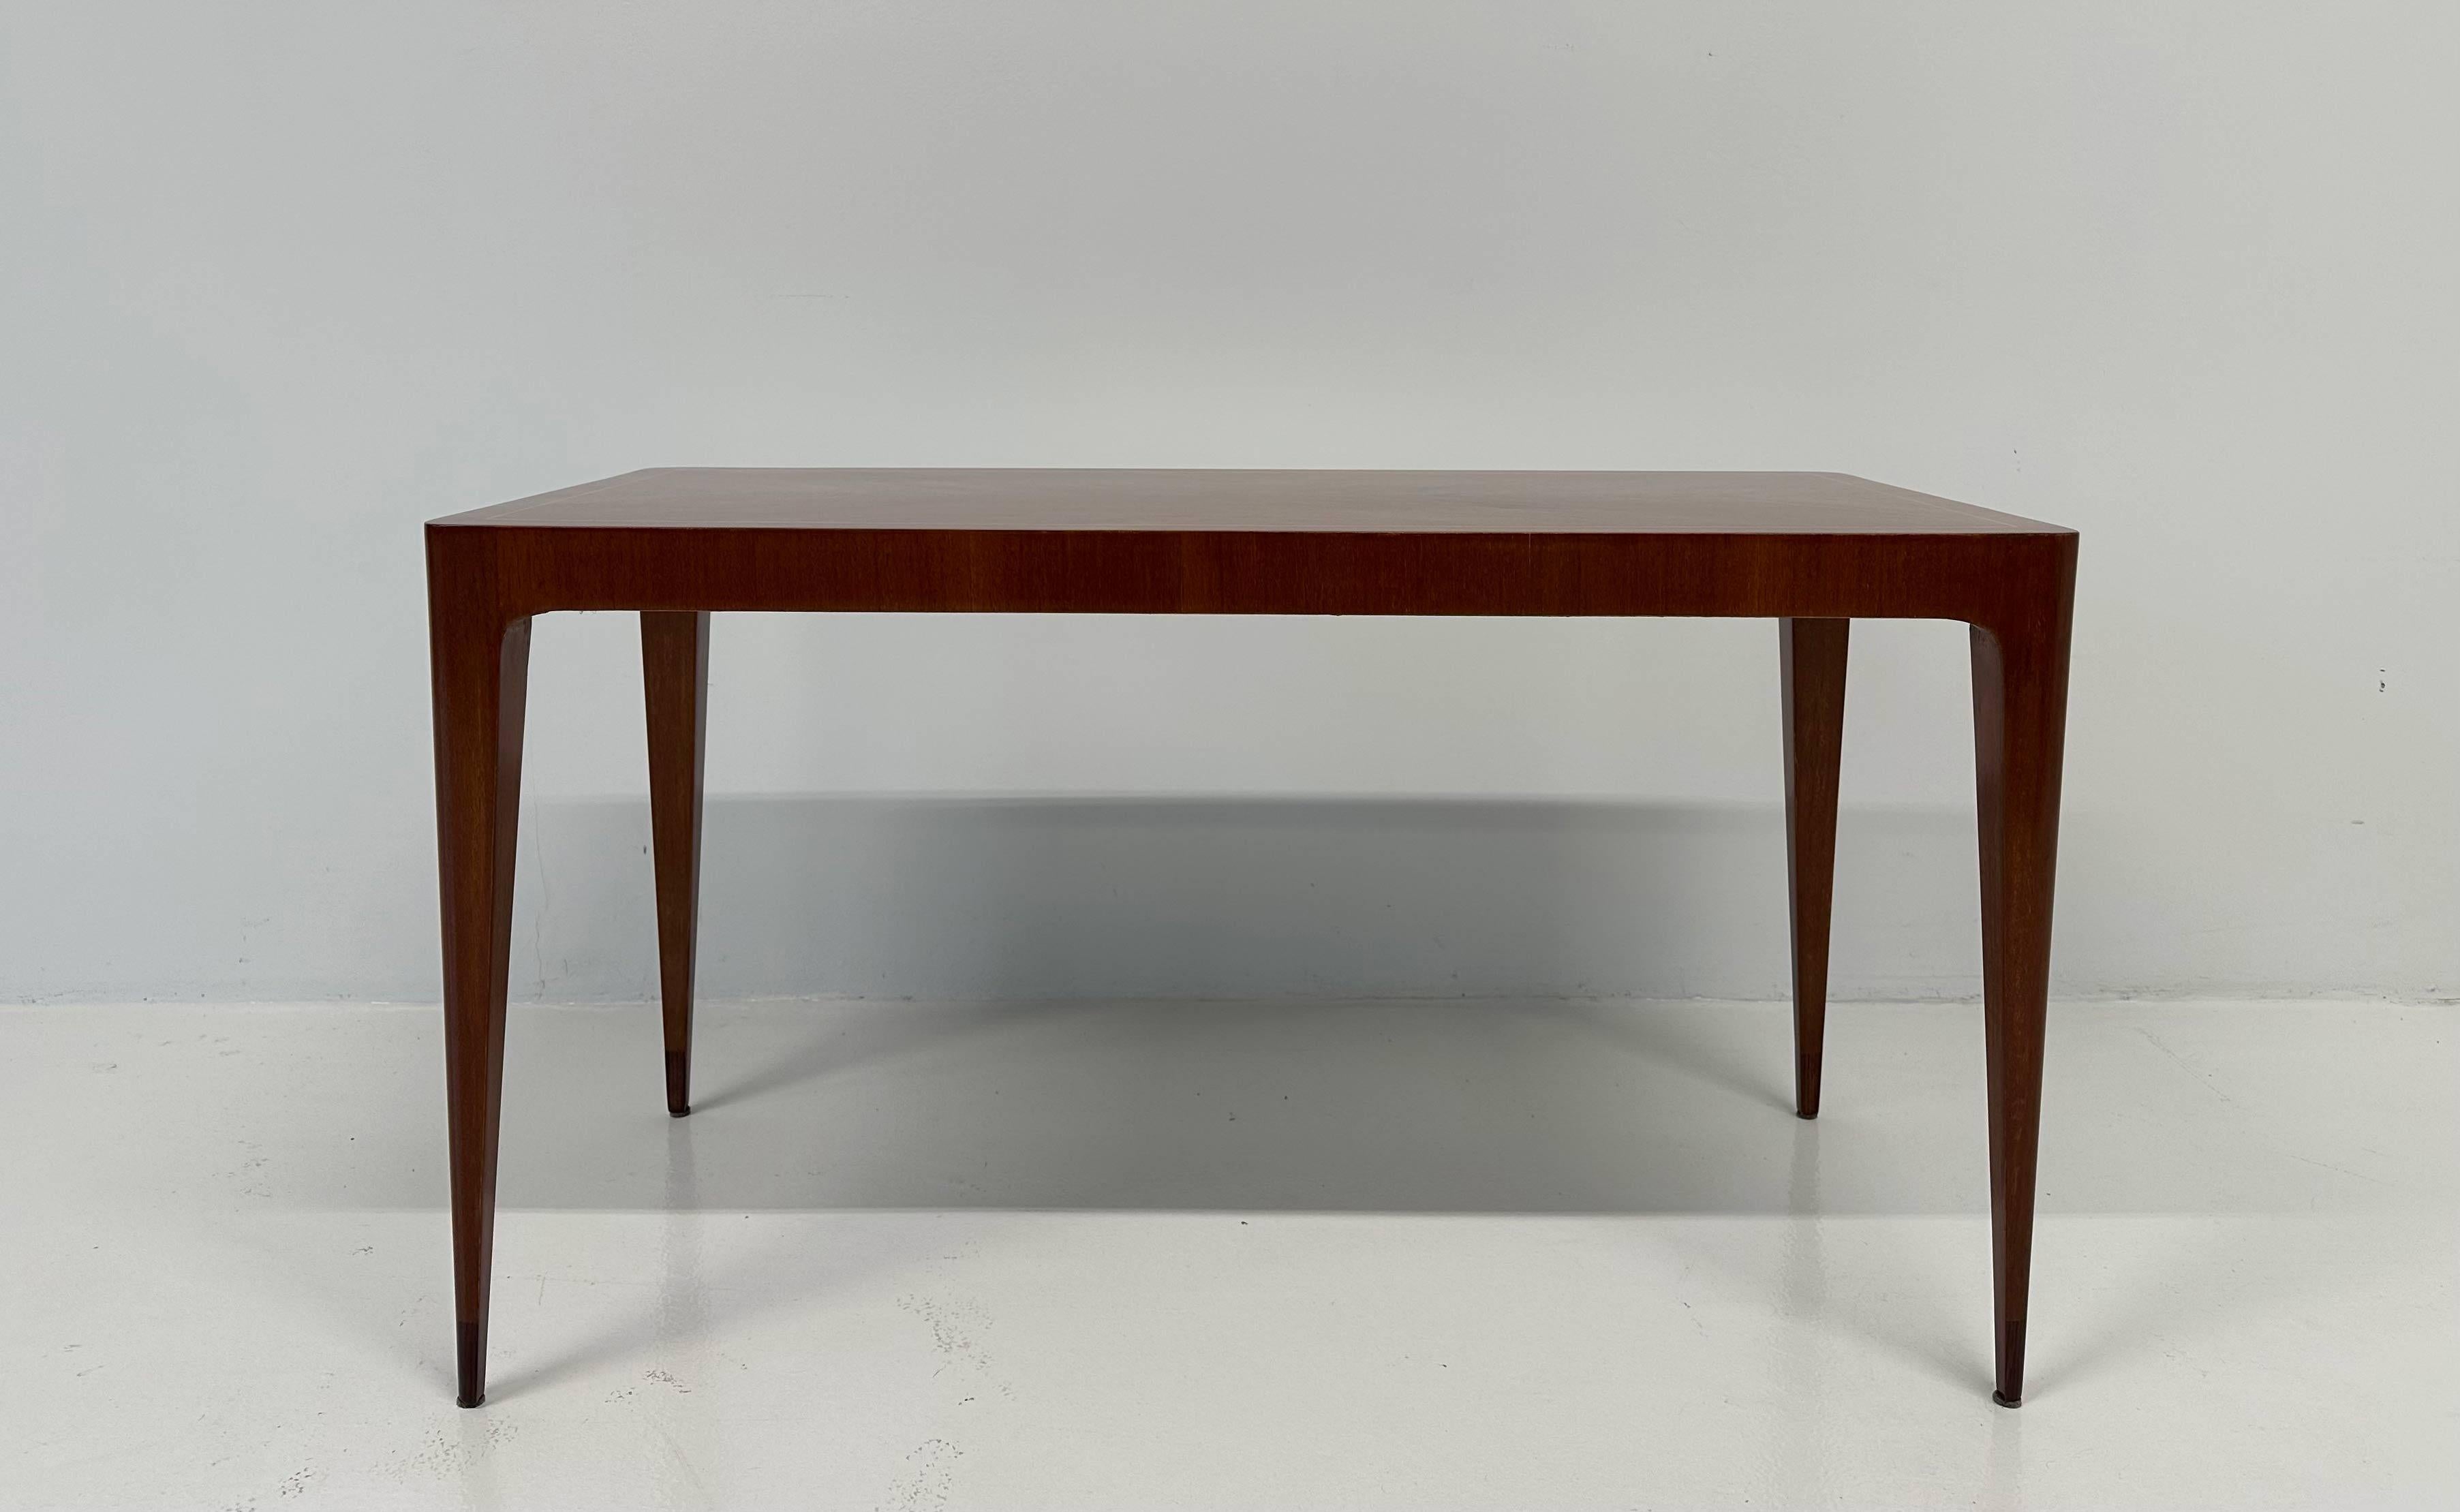 This Art Deco coffee table was produced in Italy in the 1950s by Paolo Buffa. It is completely made of Teak wood, with a fine maple line decoration on the top. 
We also have available the matching Paolo Buffa's bar cabinet, as we bought them in the